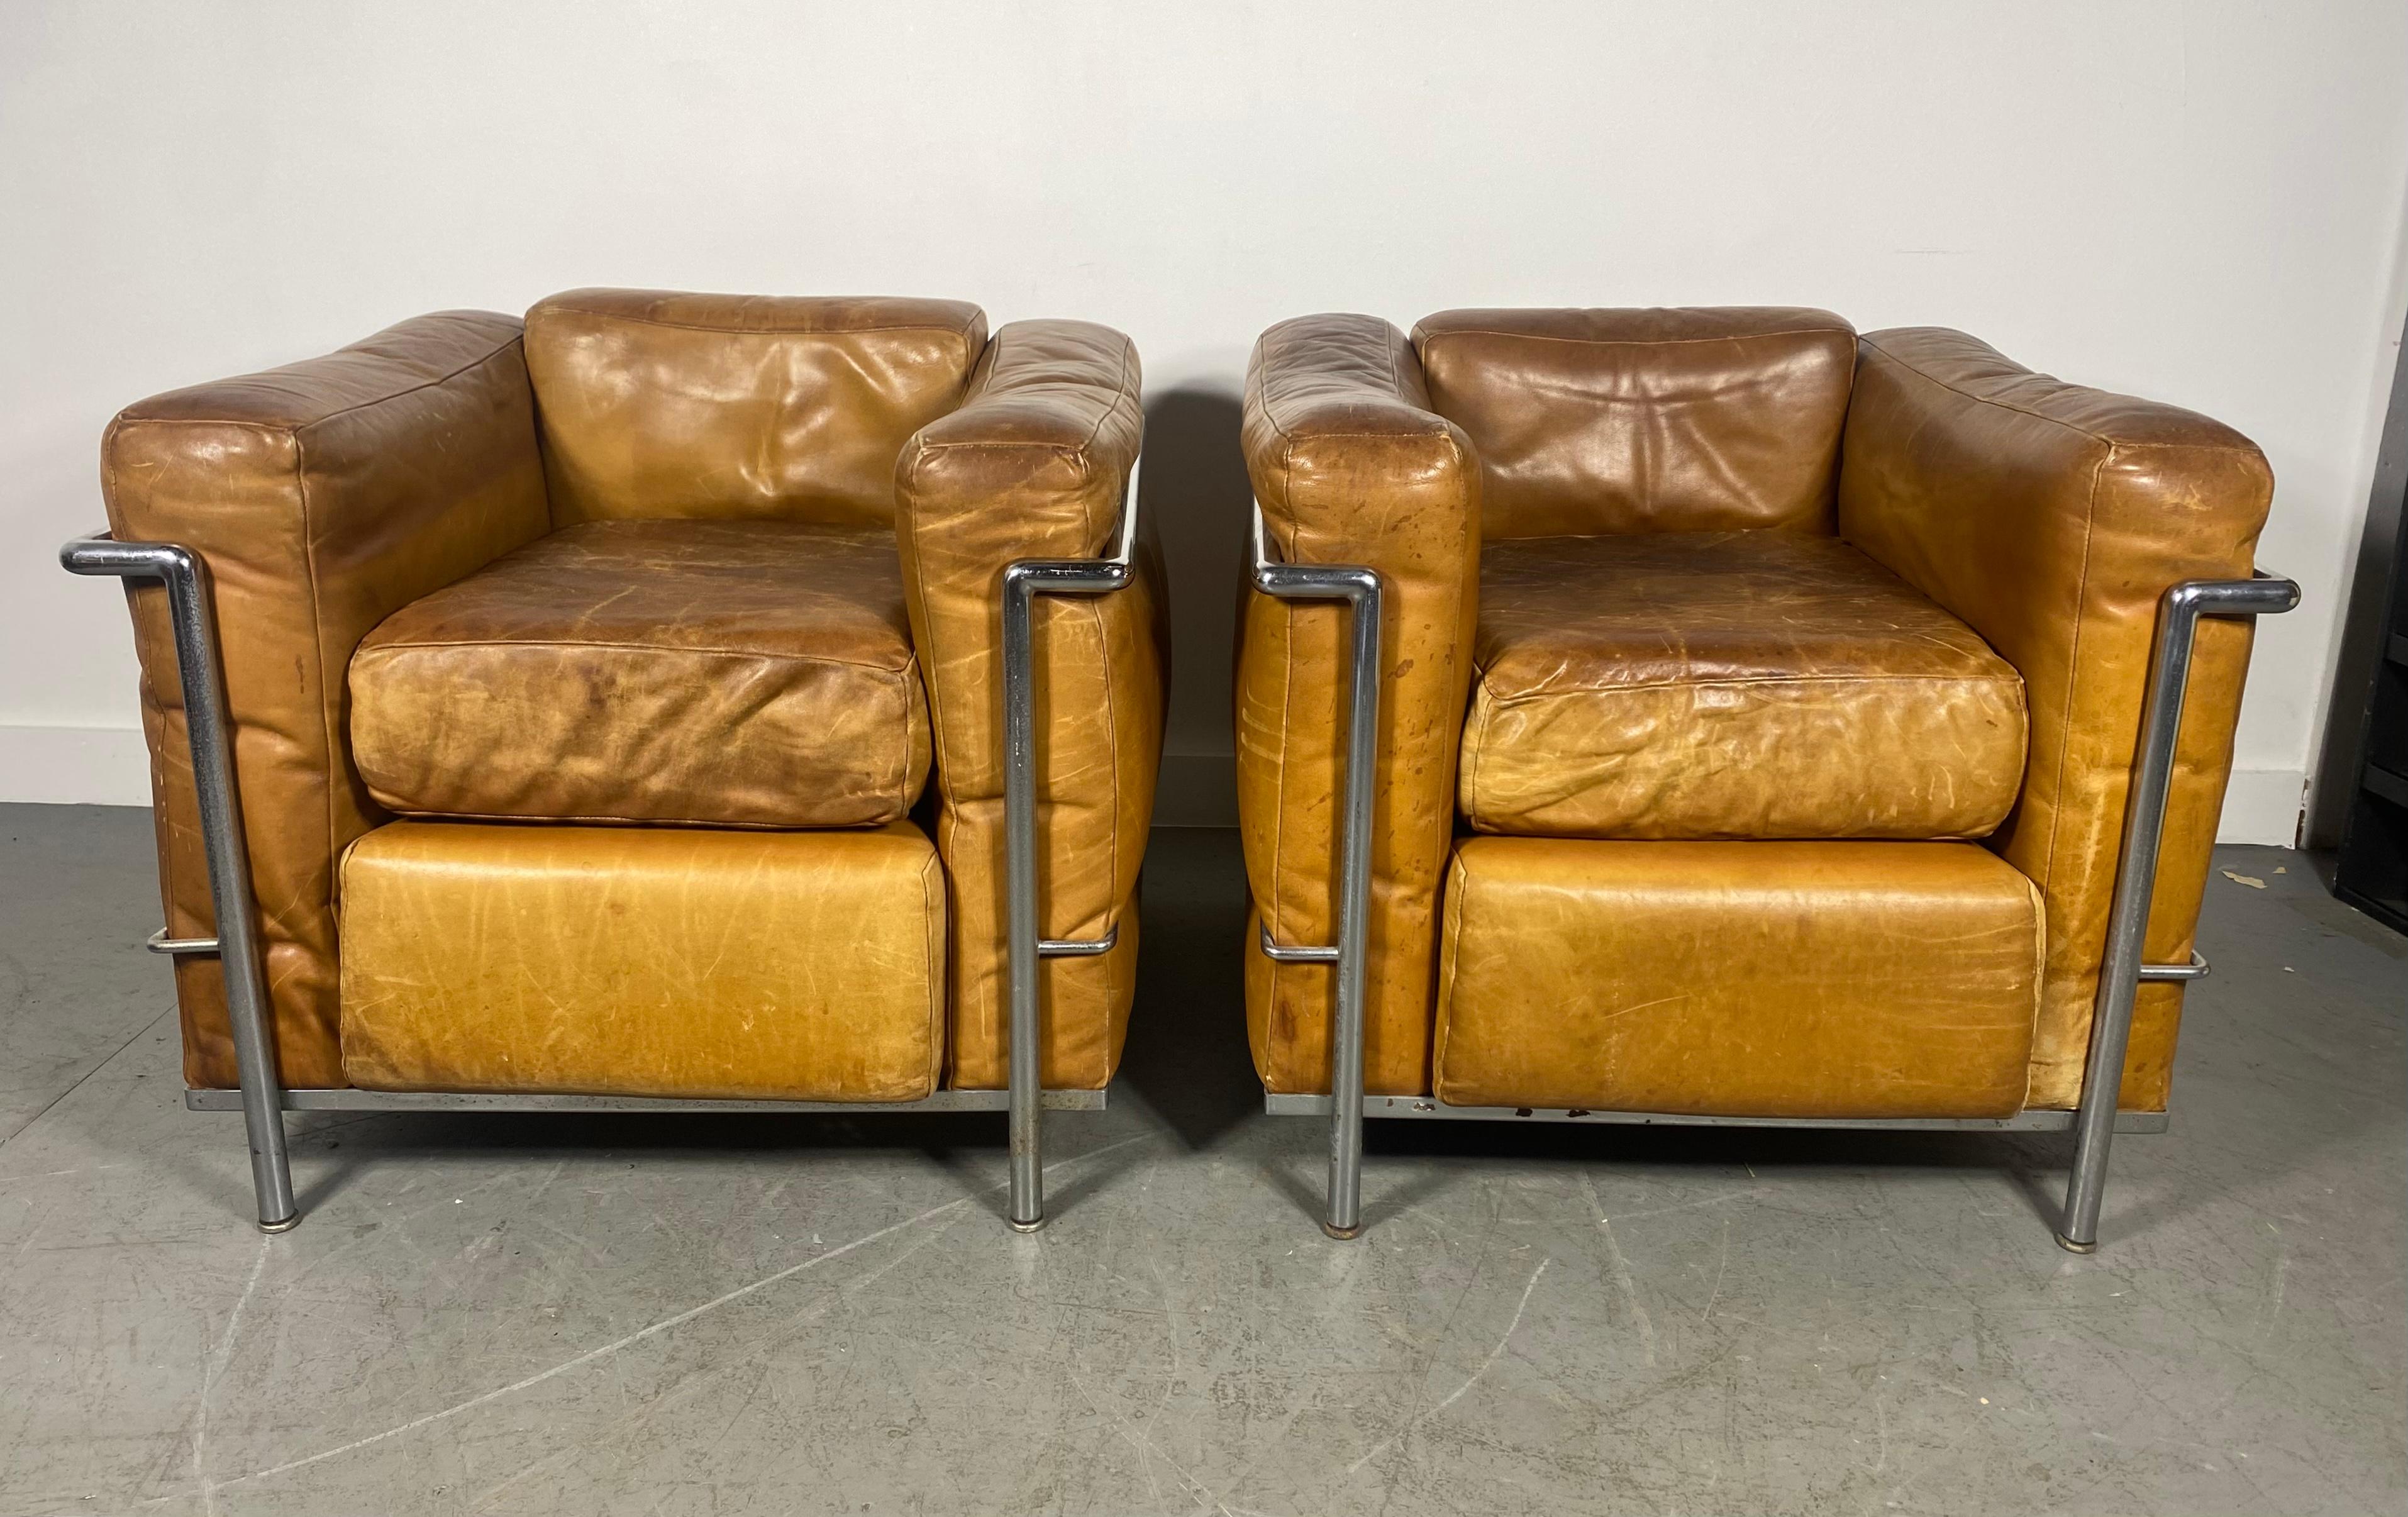 Super Early Pair of  LC2 Petite Modele Armchair Designed by Le Corbusier, Pierre Jeanneret, Charlotte Perriand, made in Italy in original brown leather cushions and chrome frame. The Chairs are in good condition overall, Truely amazing patina..